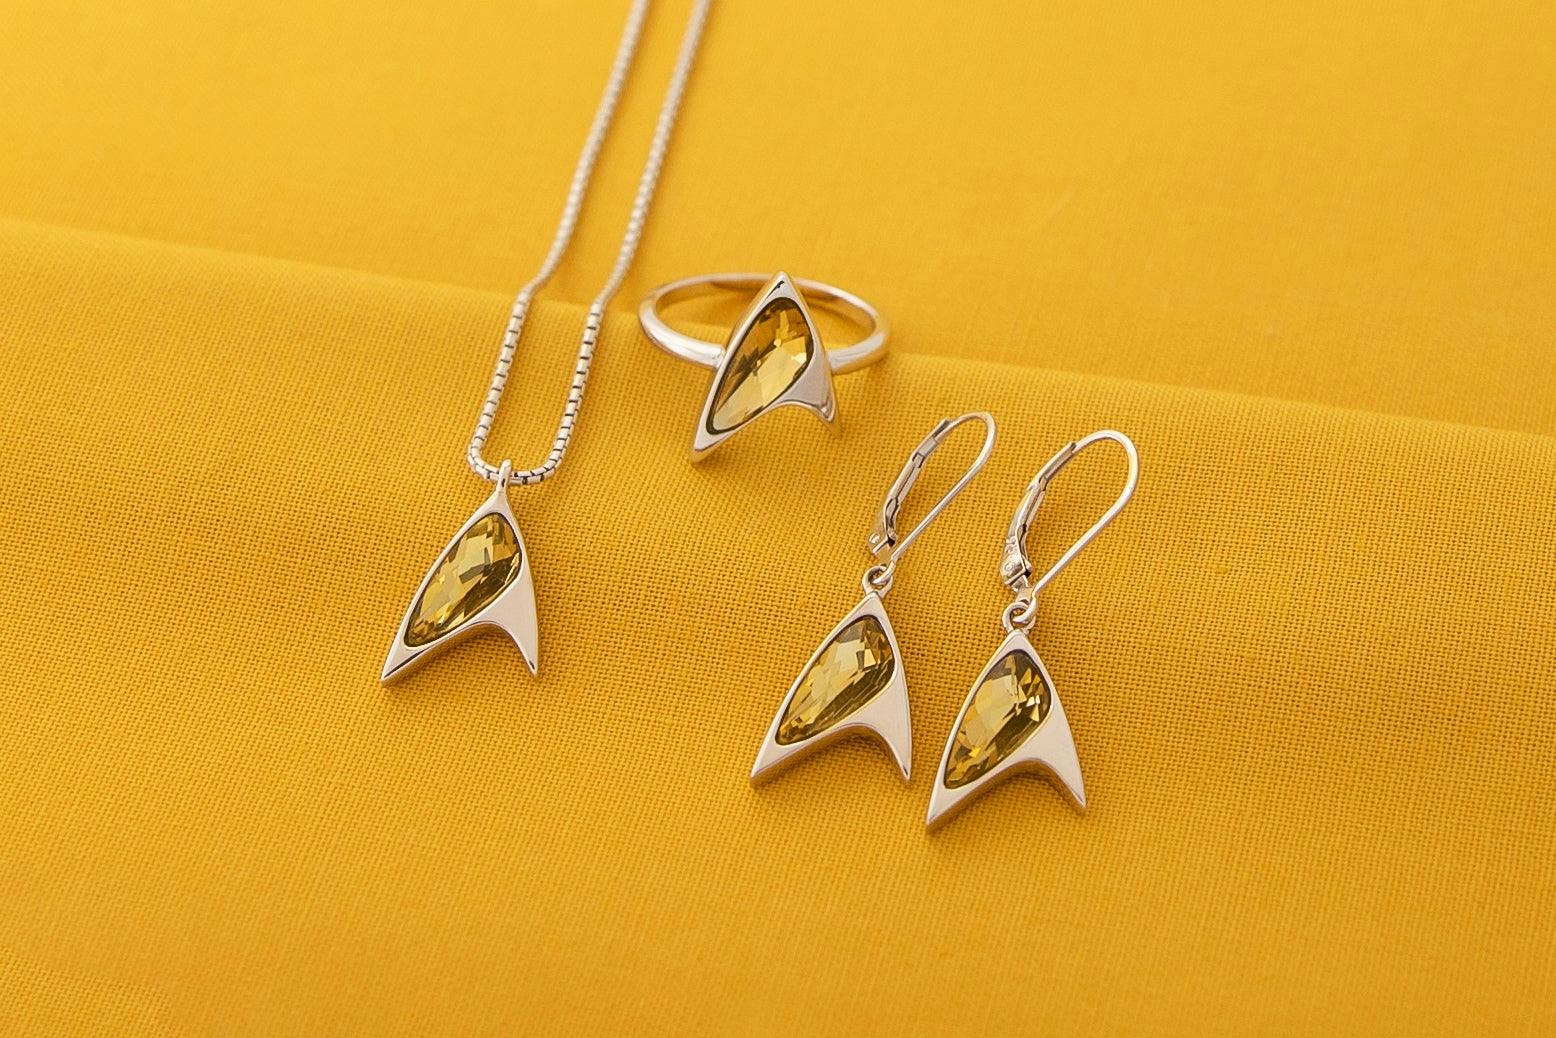 Star Trek X RockLove Crystal Delta Earring, Ring, and Pendant (Yellow)